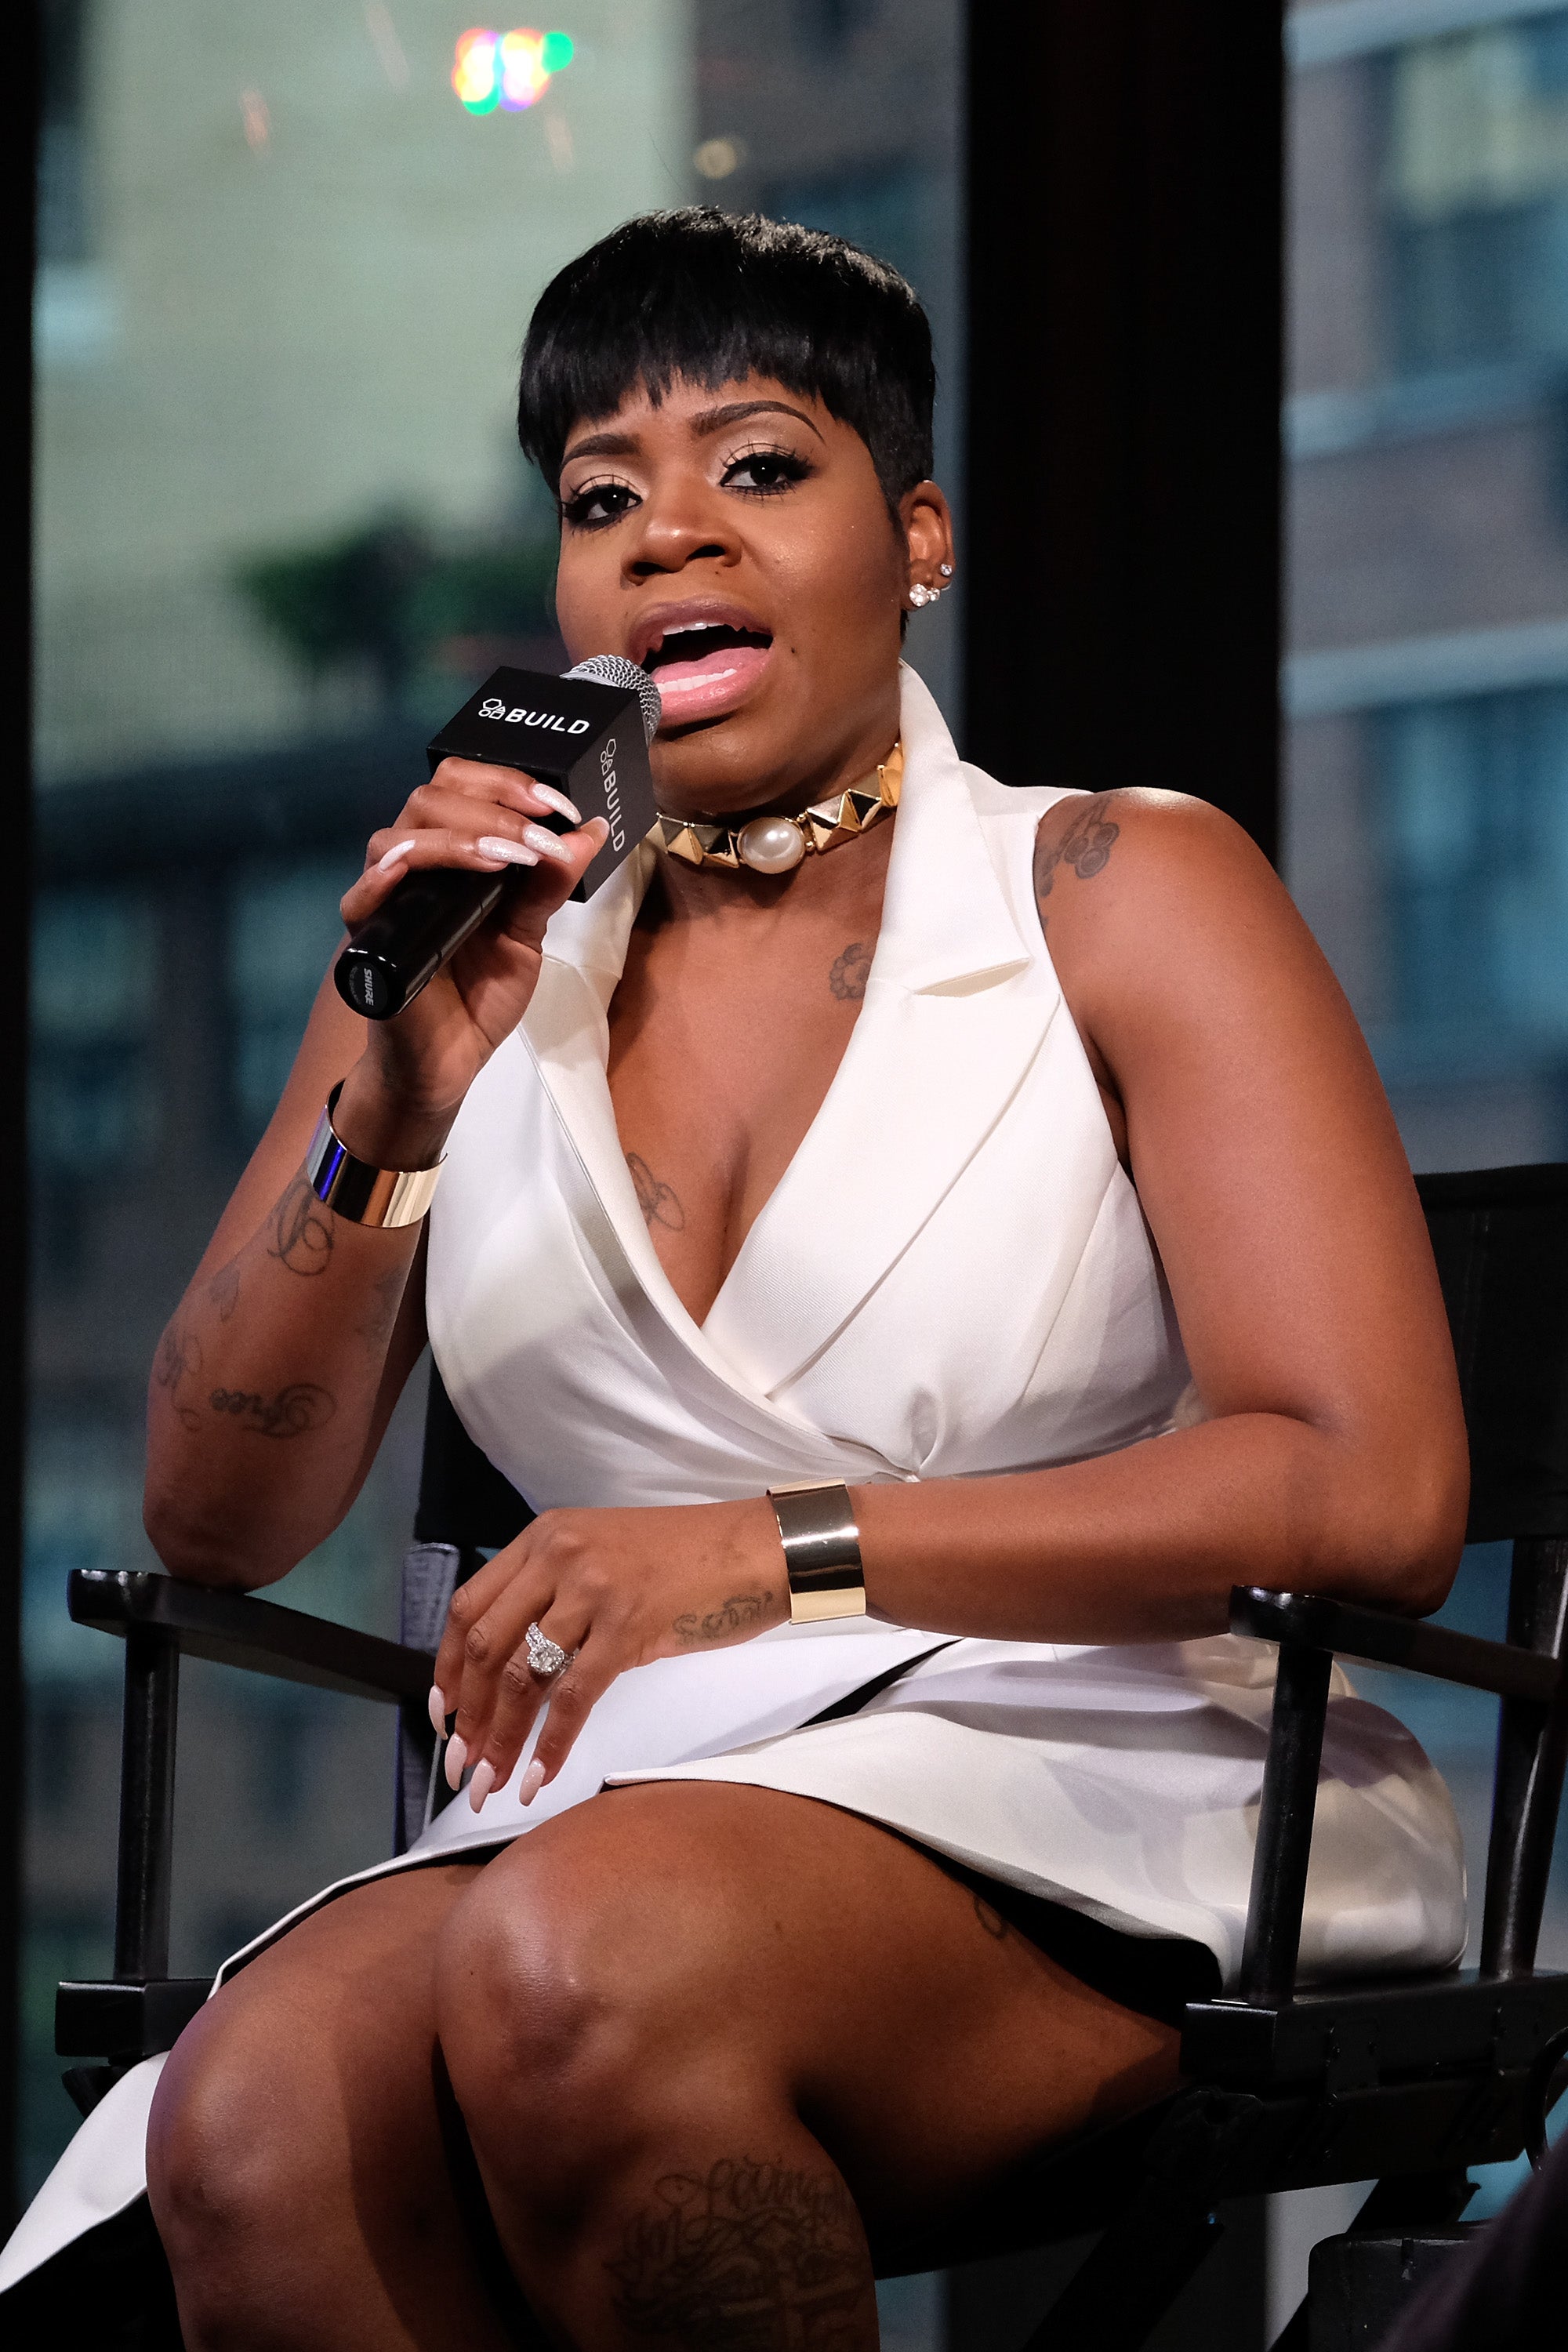 Fantasia Barrino Cancels ‘All Lives Matter’ Concert, Issues Statement